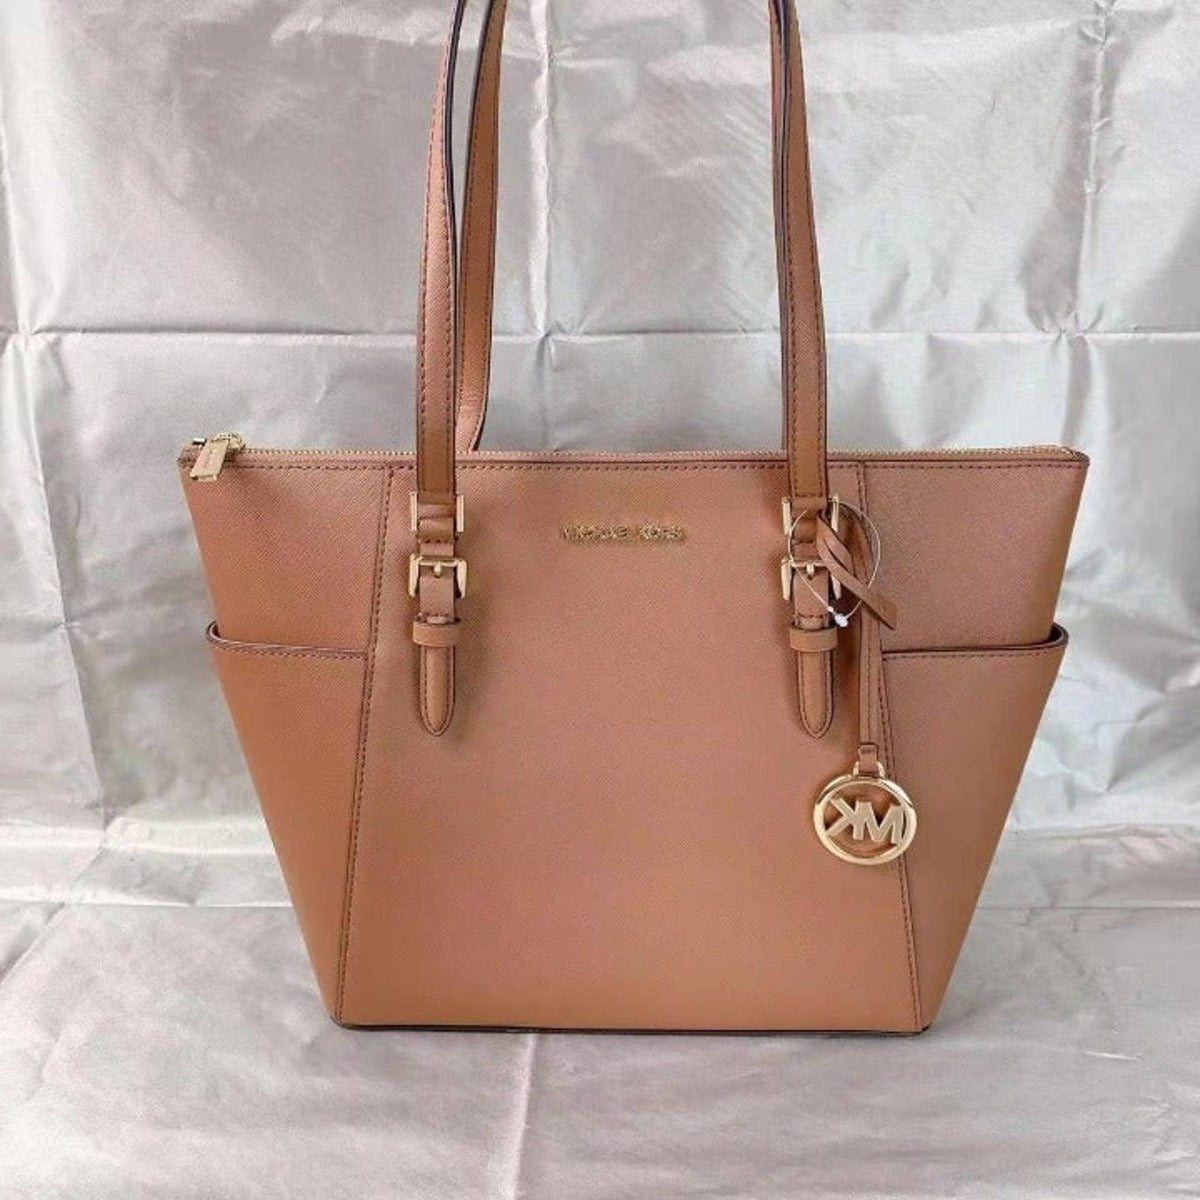 MICHAEL KORS 35T0GCFT7L CHARLOTTE LARGE SAFFIANO LEATHER TOTE BAG IN LUGGAGE